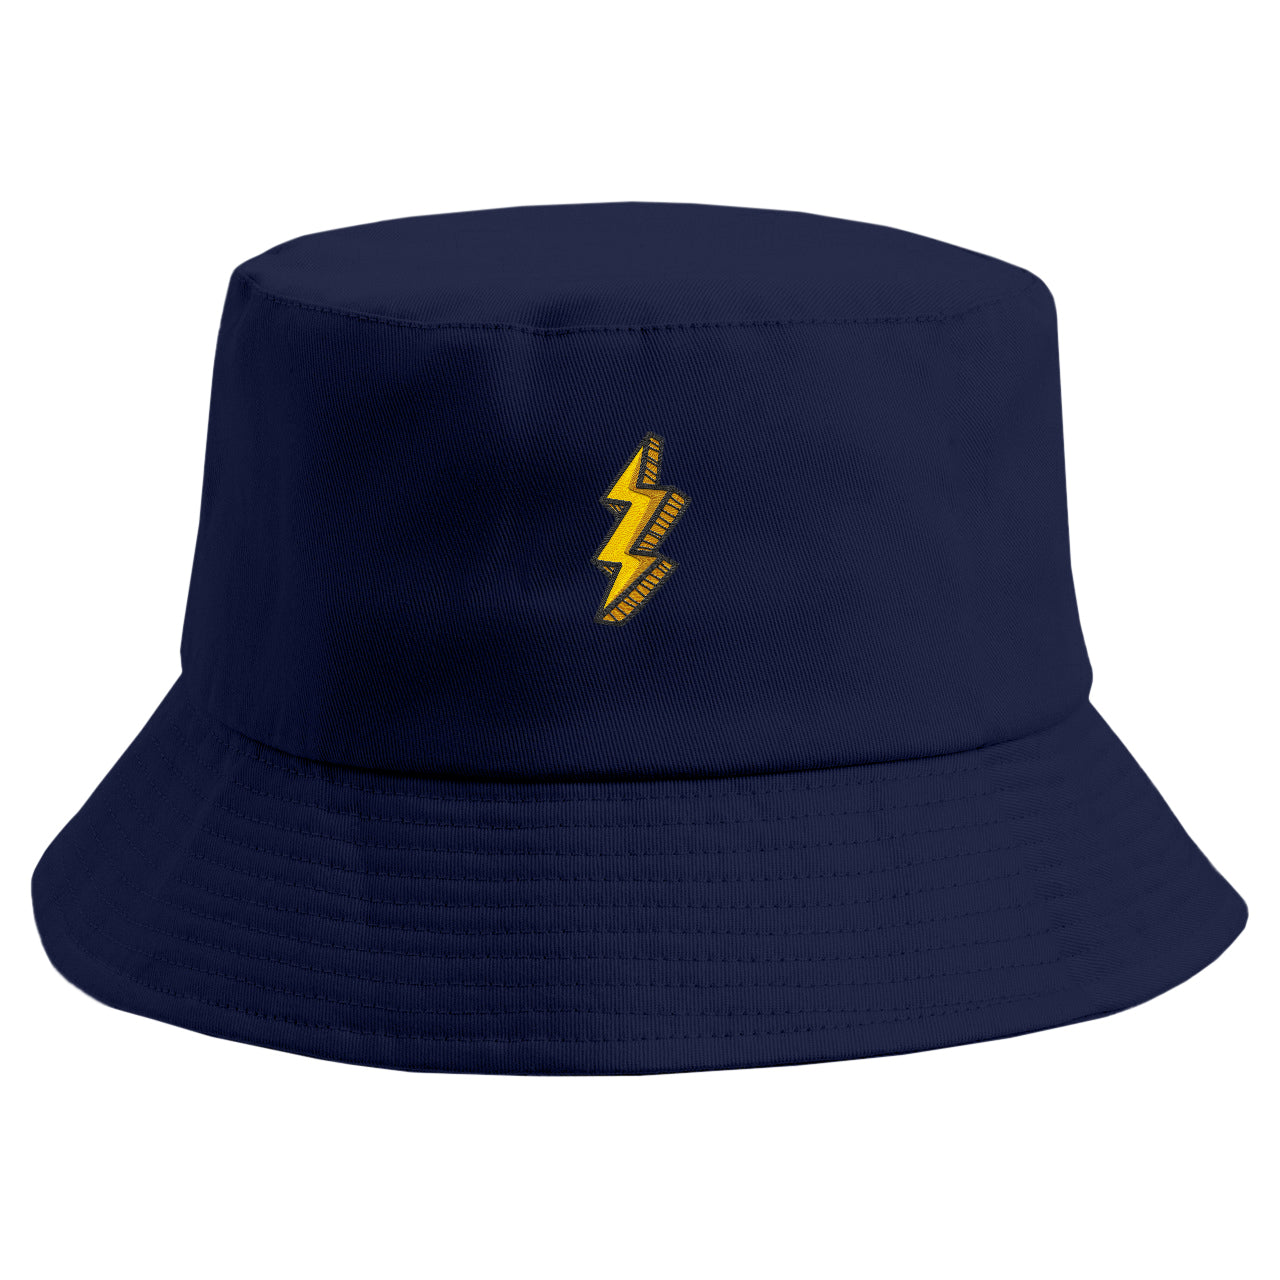 Embroidered Thunder Bucket Hat